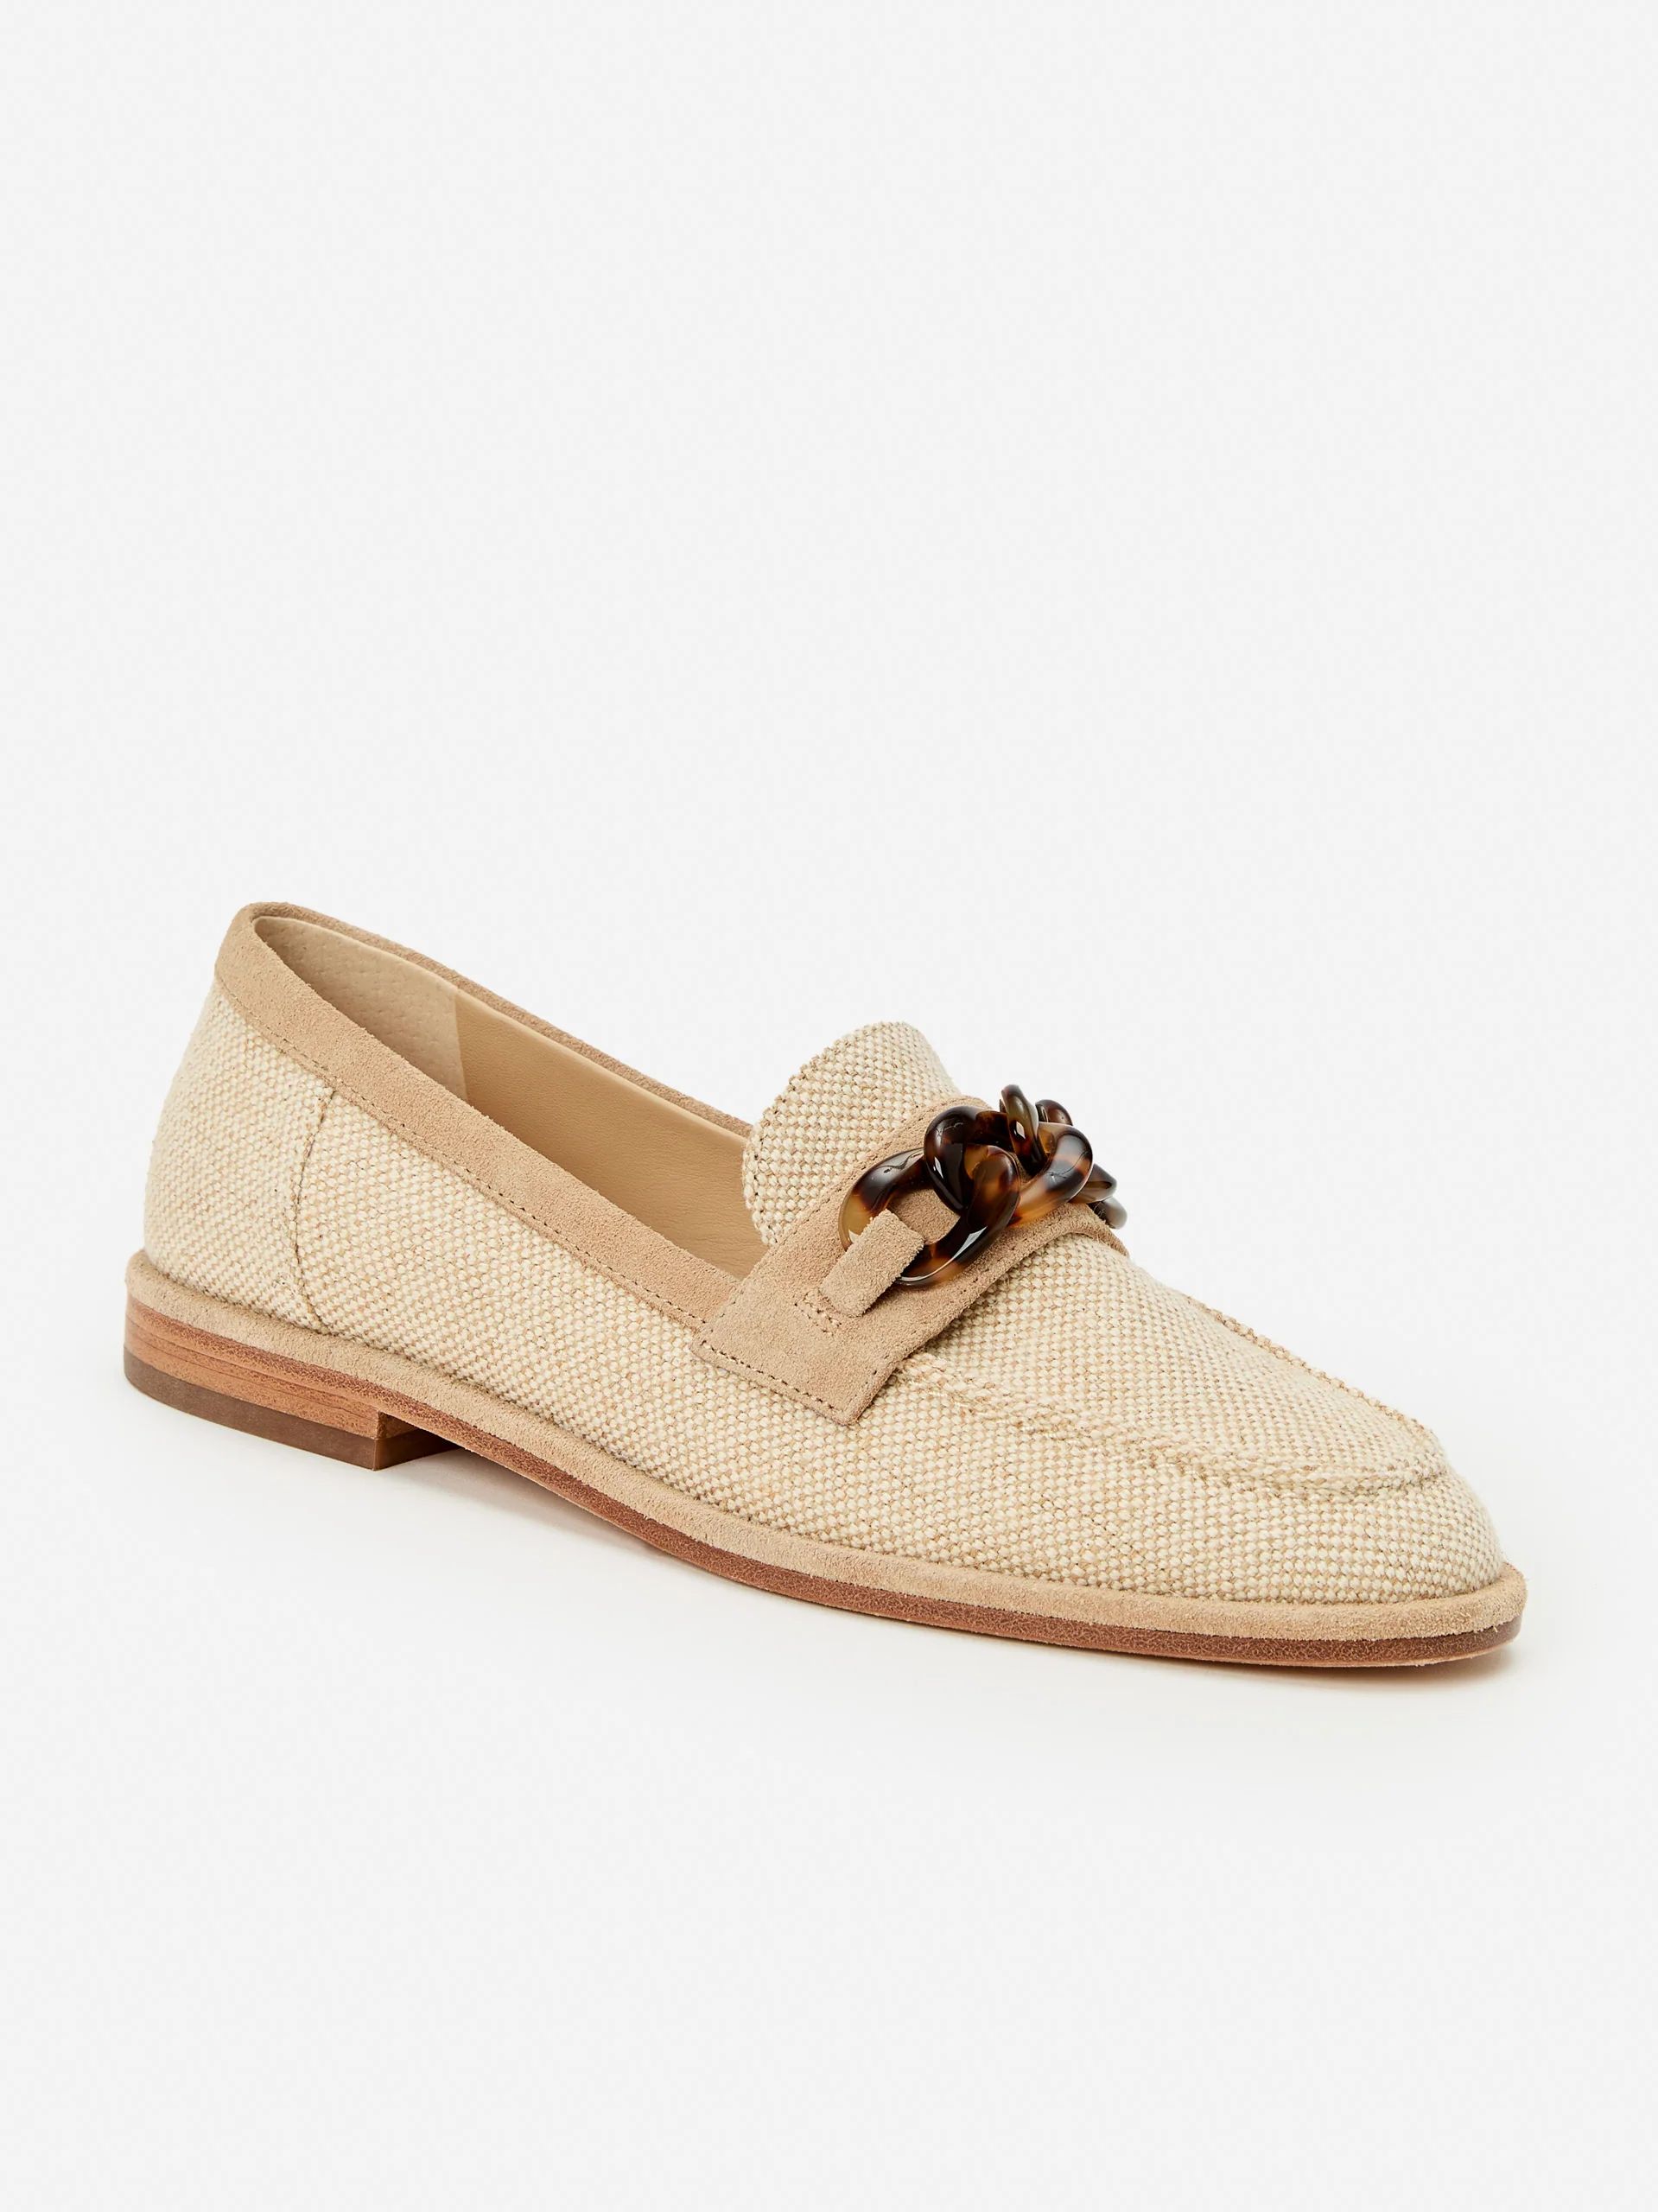 Concetta Loafers | J.McLaughlin